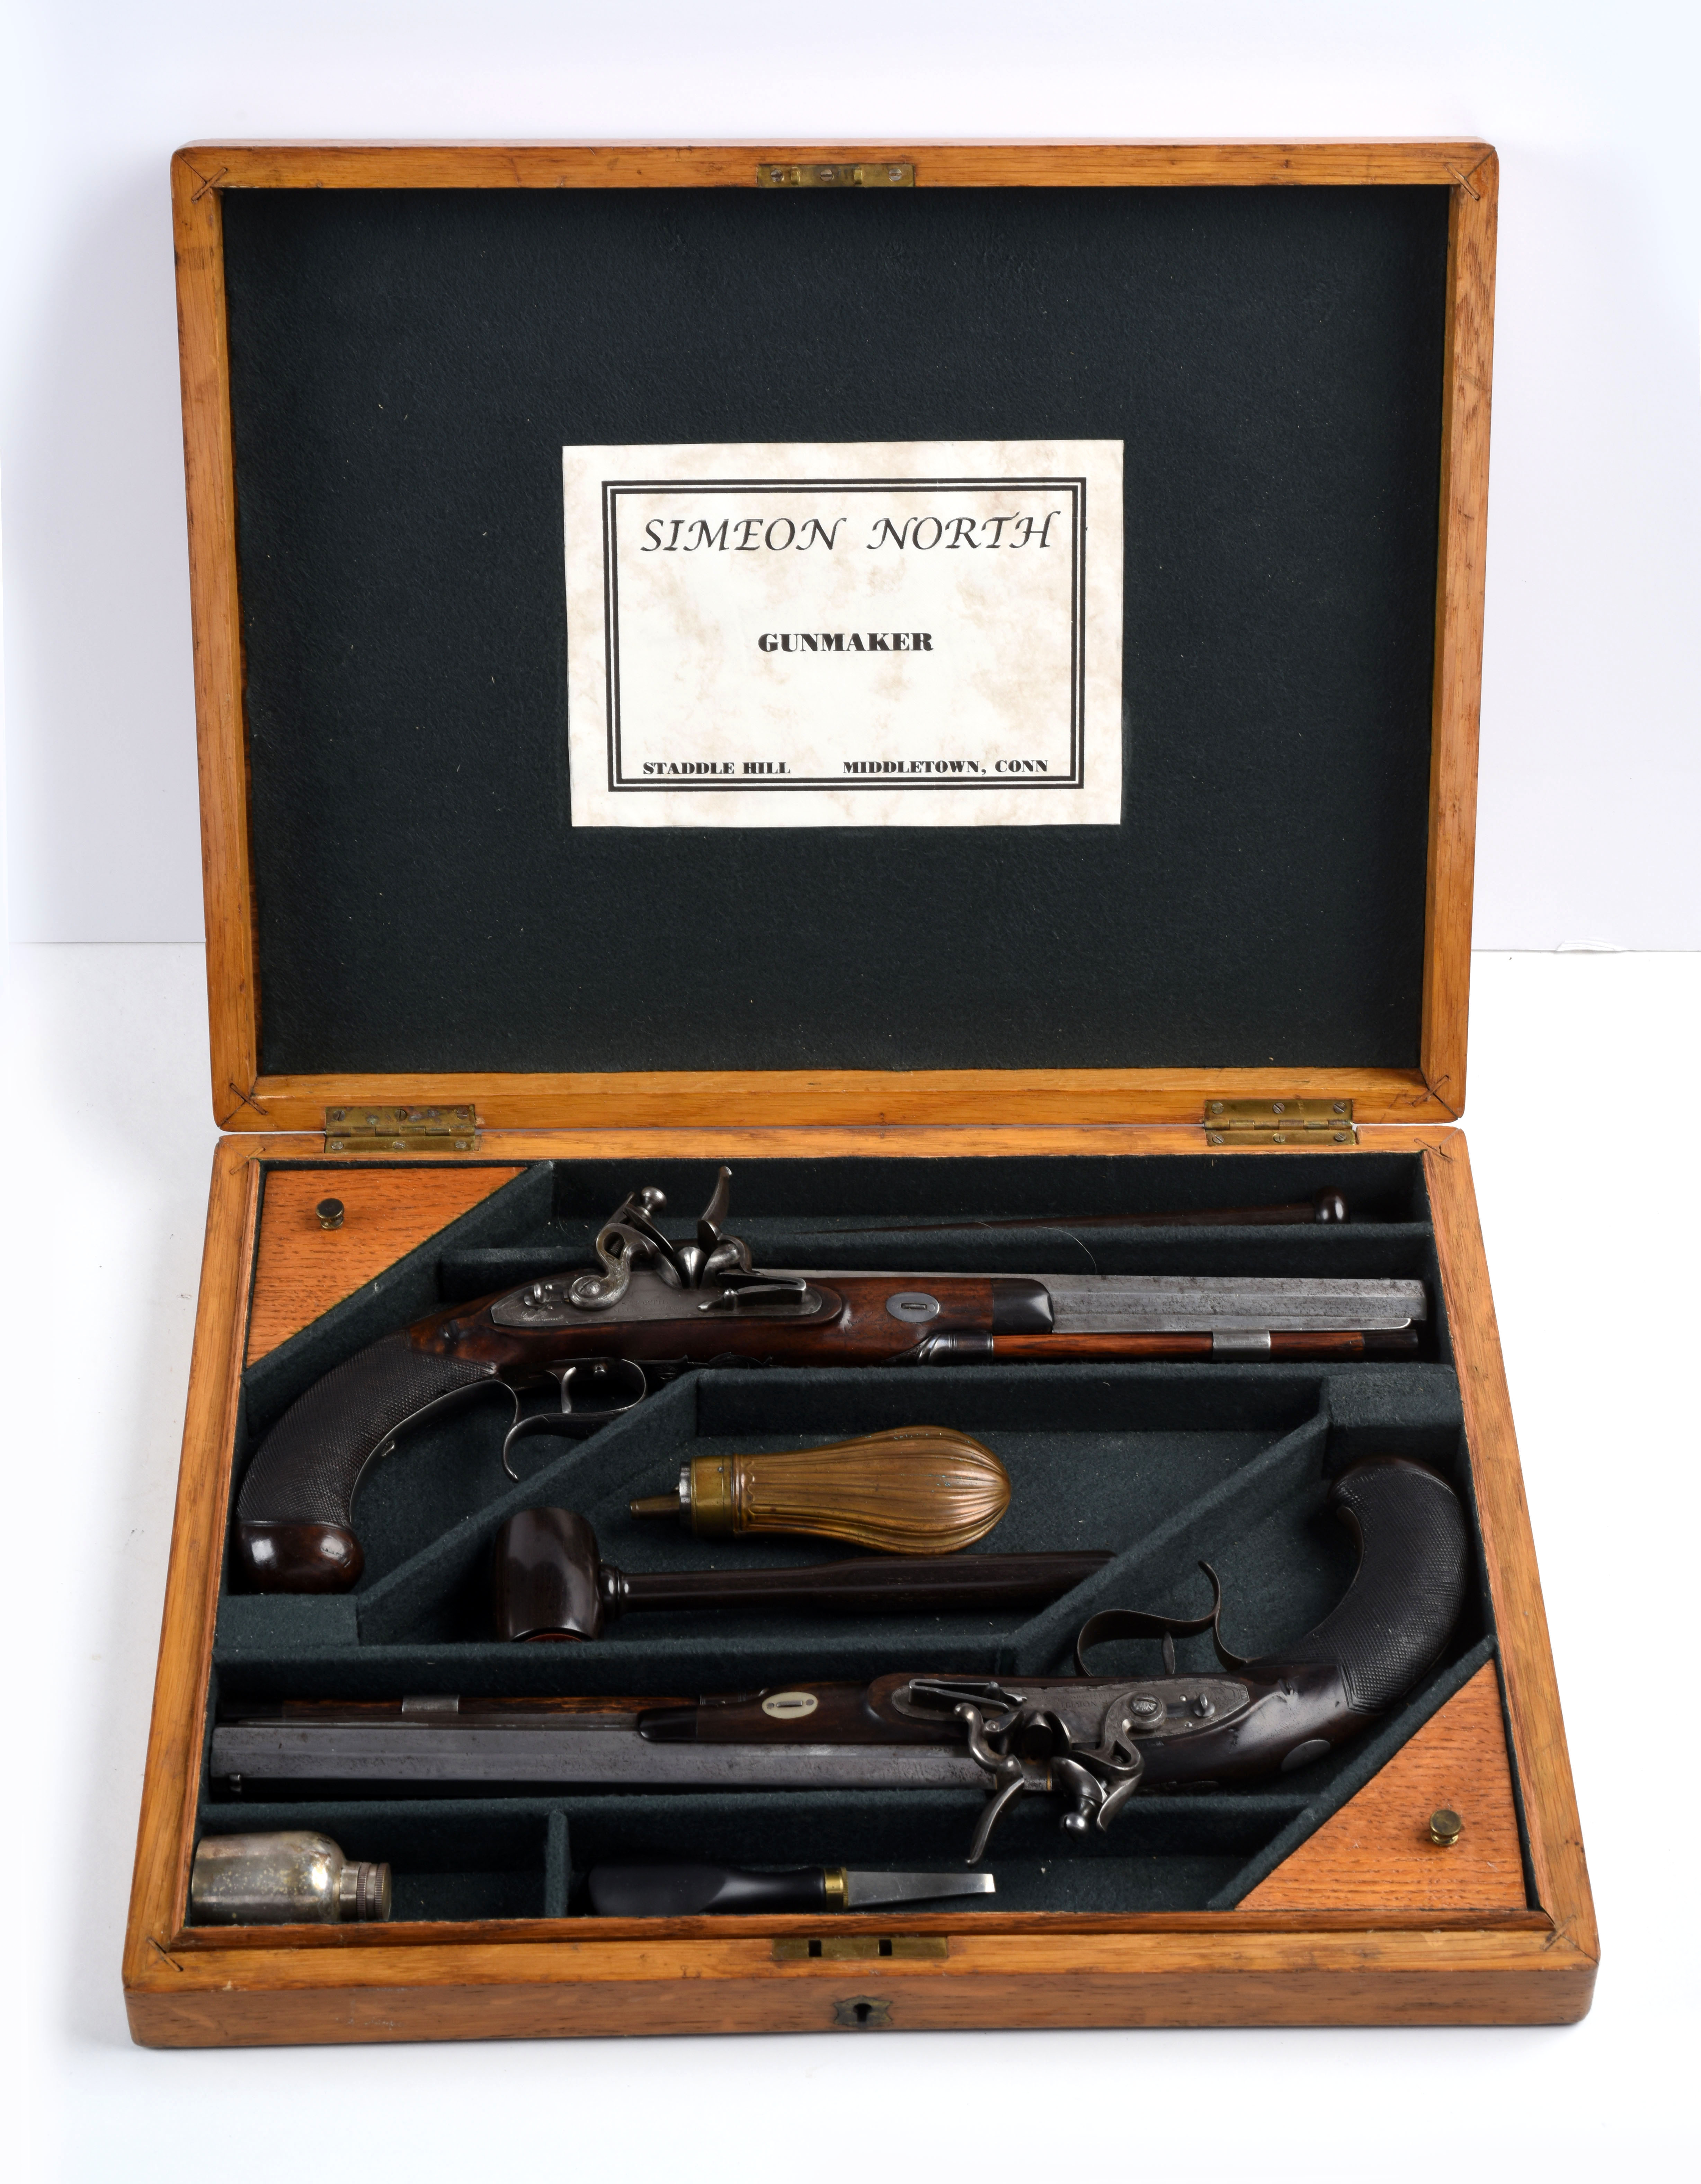 Cased Set of Simeon North Dueling Pistols, estimated at $15,000-25,000.